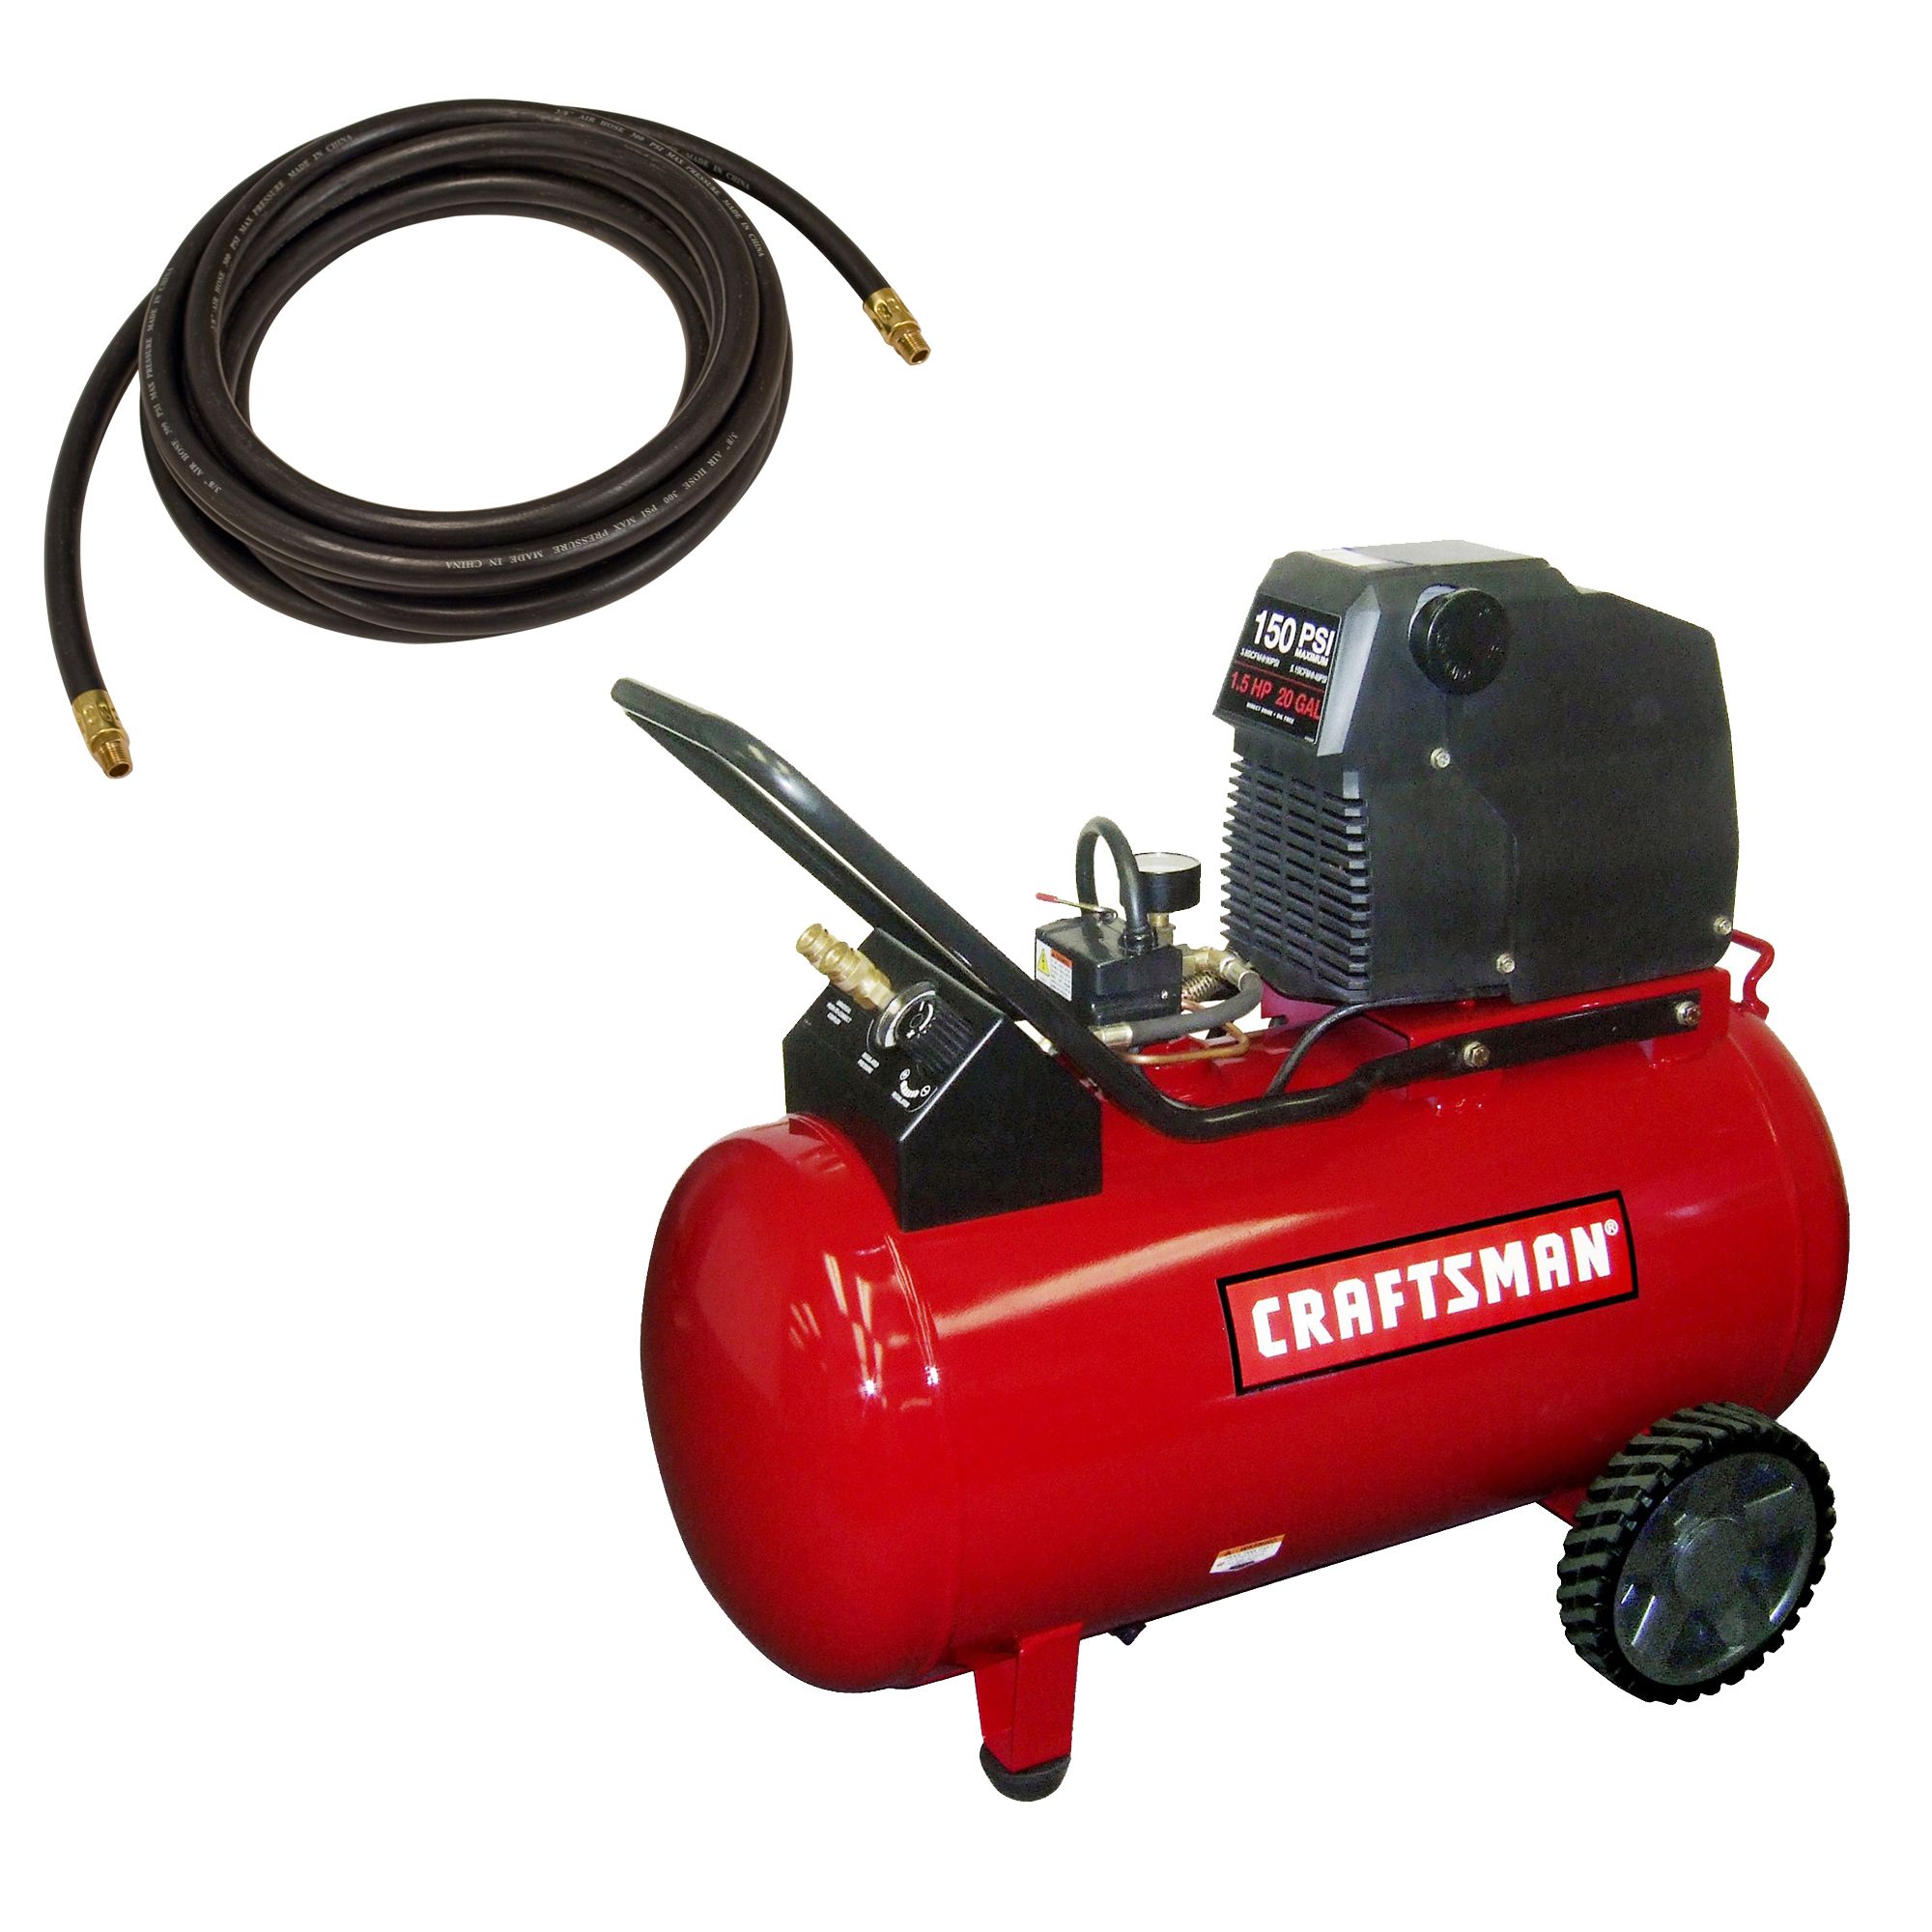 Craftsman 20 Gallon Portable Horizontal Air Compressor with Hose and Kit